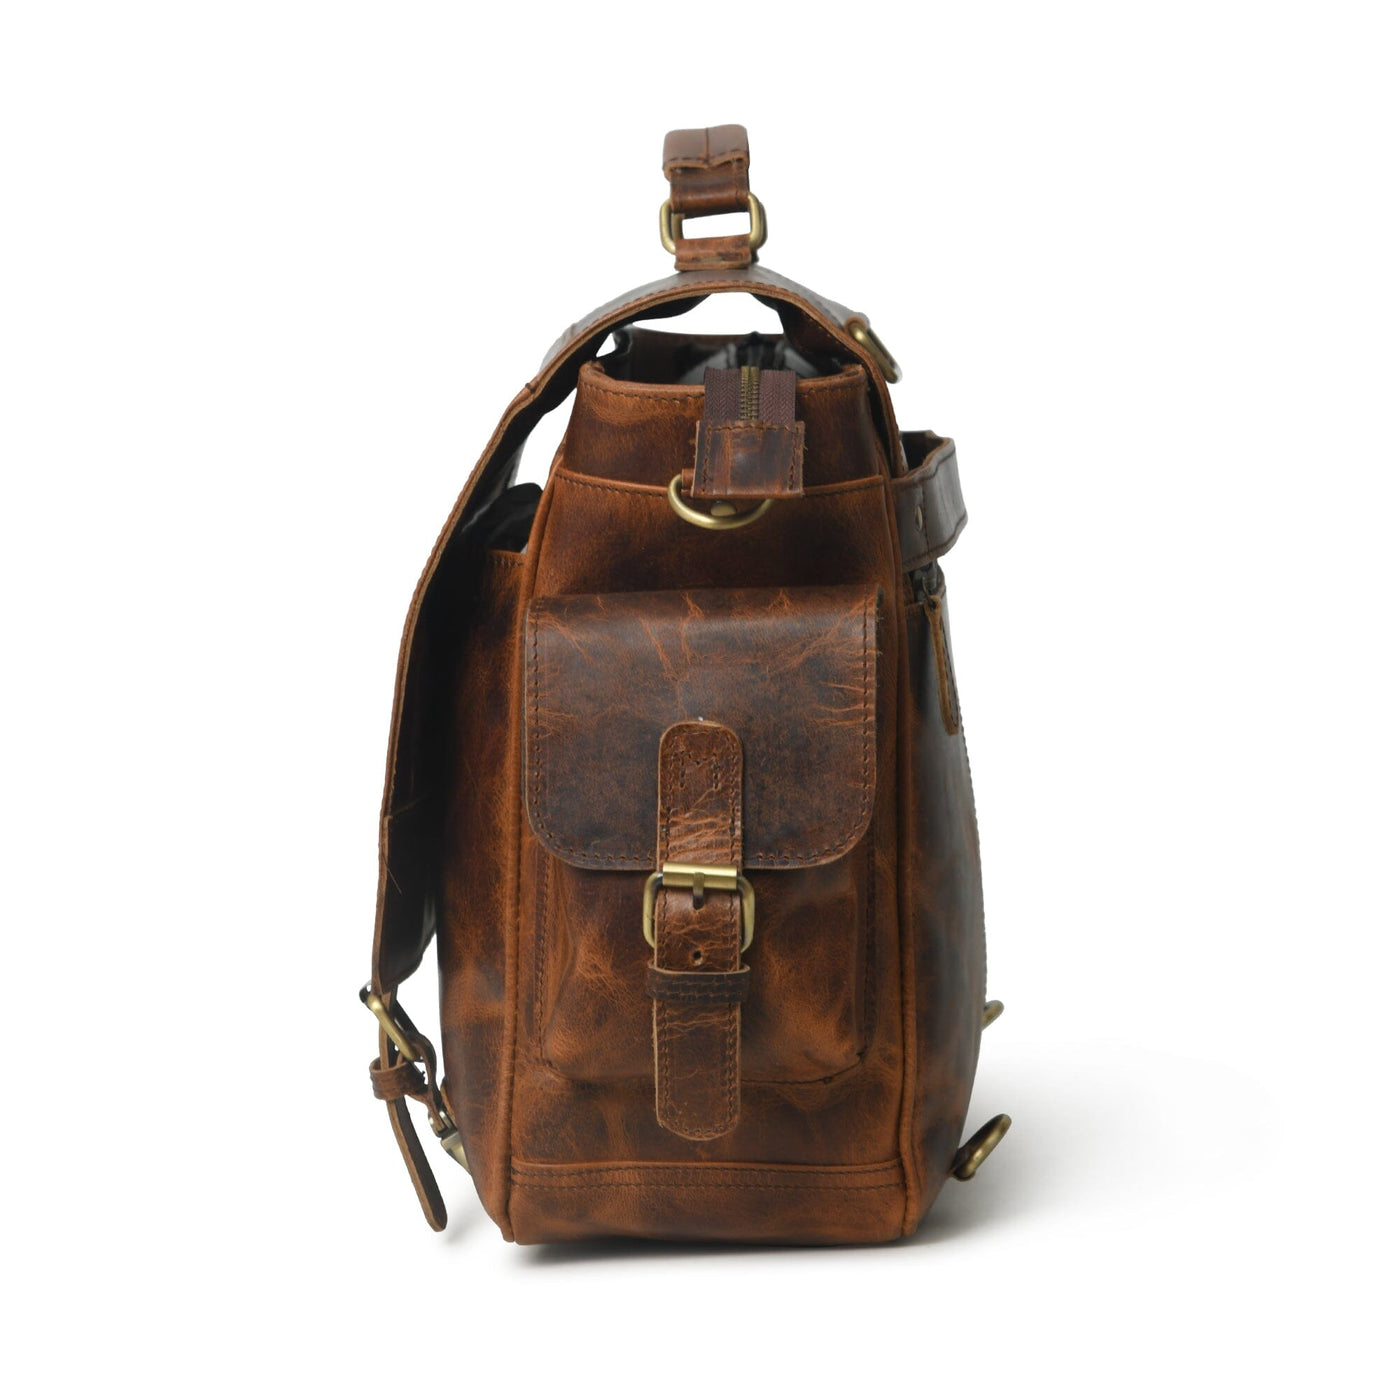 Shop Leather Bags & Leather Goods, Jackets Online in USA — Classy ...